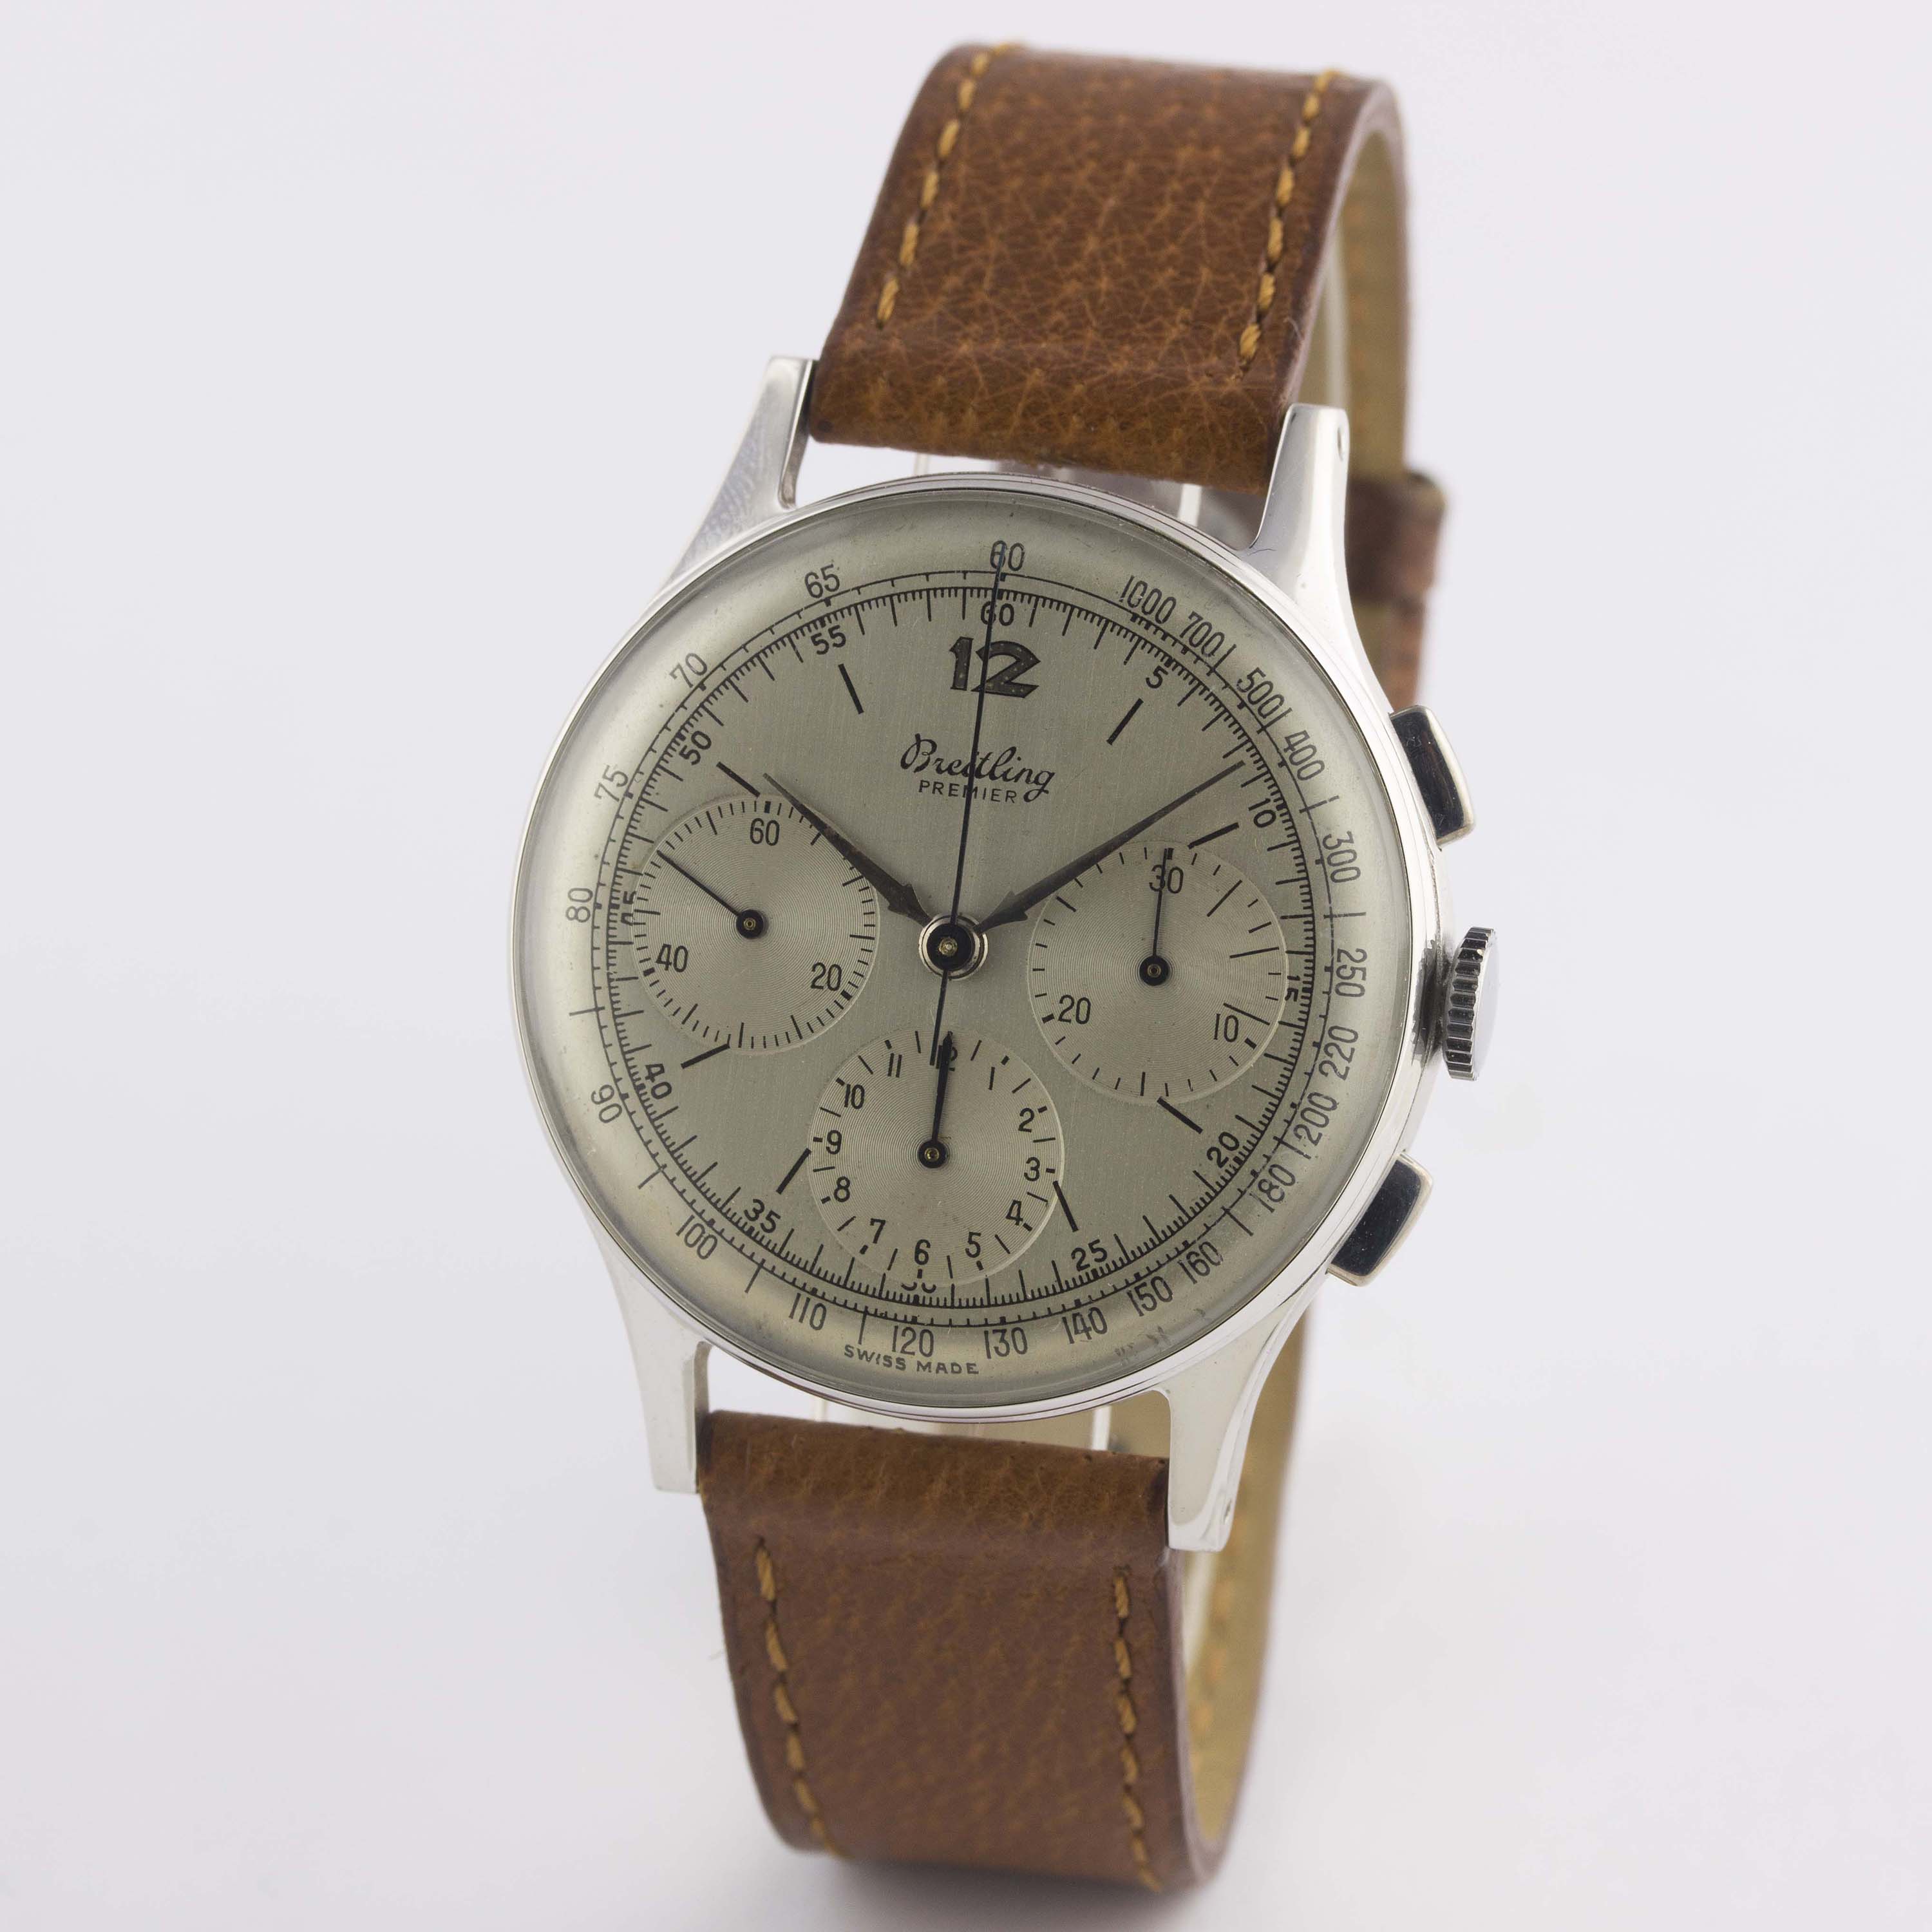 A RARE GENTLEMAN'S LARGE SIZE BREITLING PREMIER CHRONOGRAPH WRIST WATCH CIRCA 1946, REF. 734 - Image 4 of 9